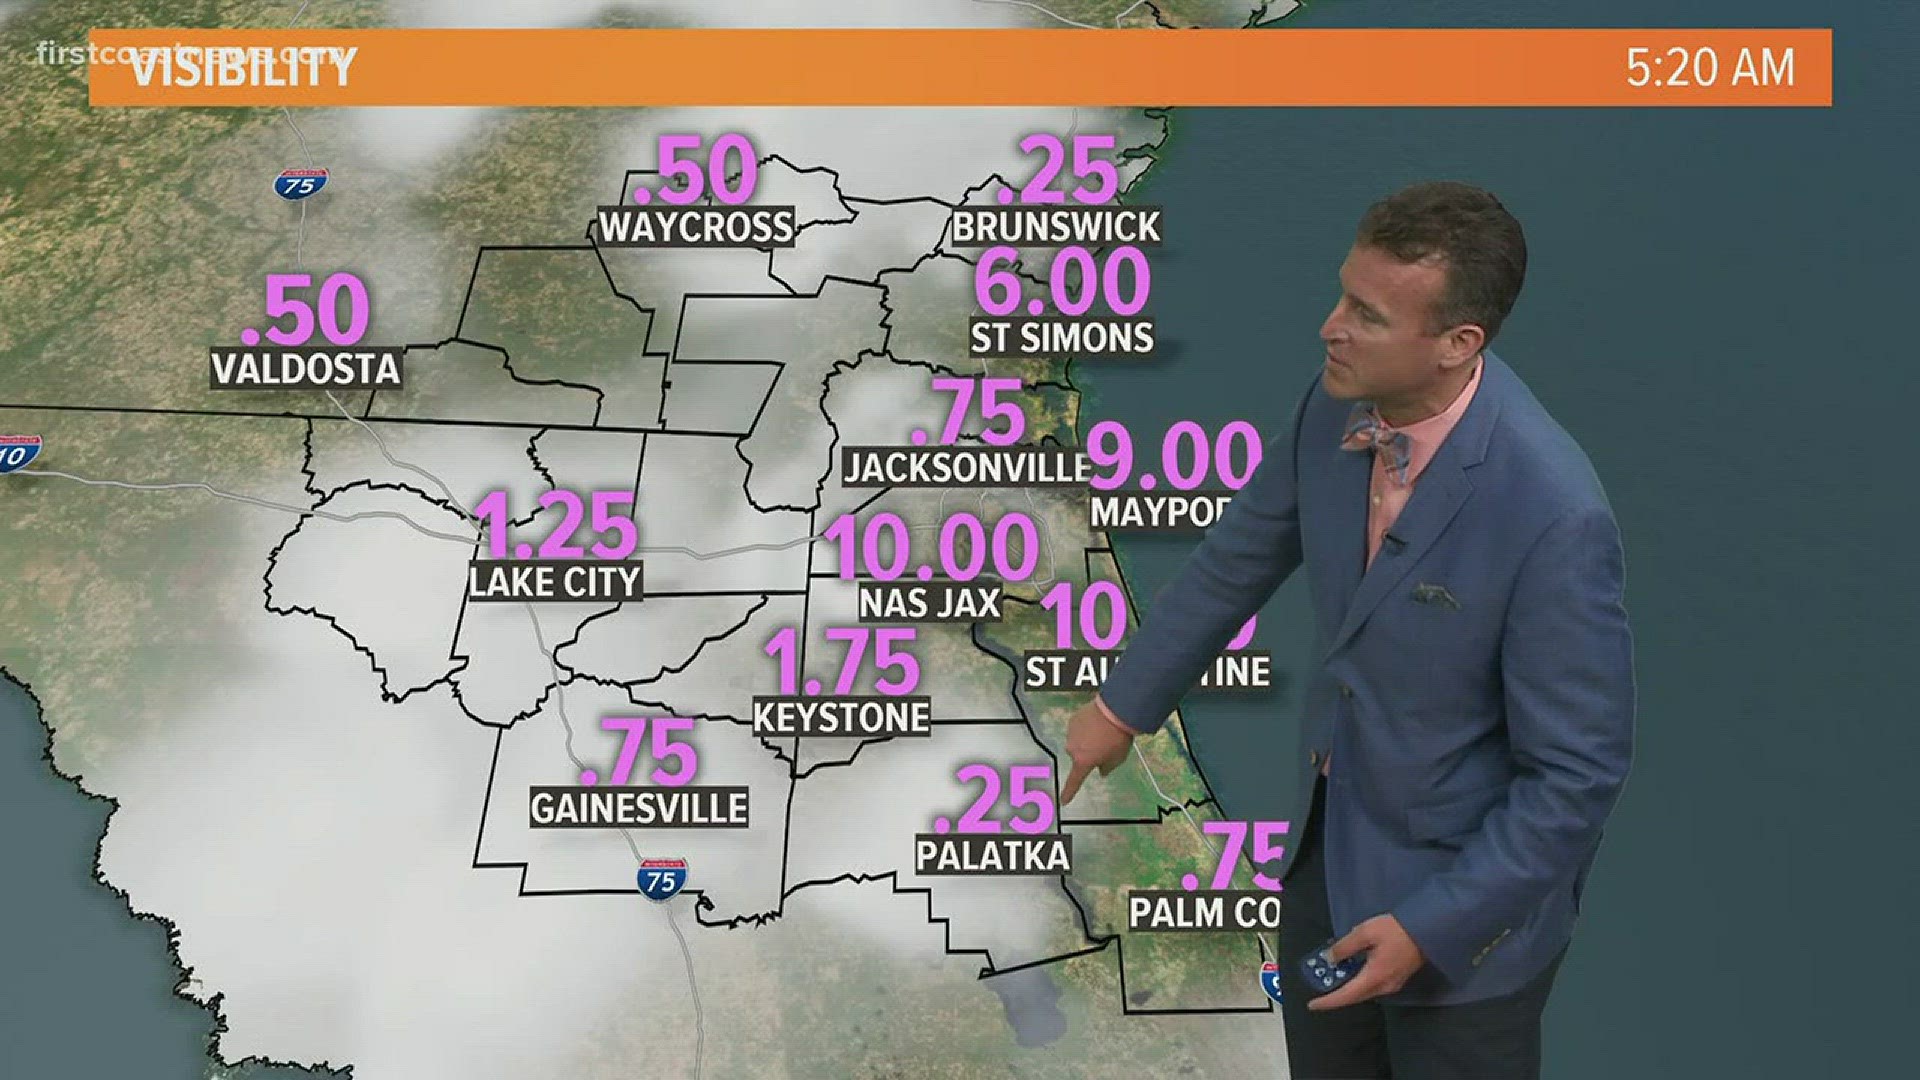 Mike Prangley has your latest on the First Coast weather.